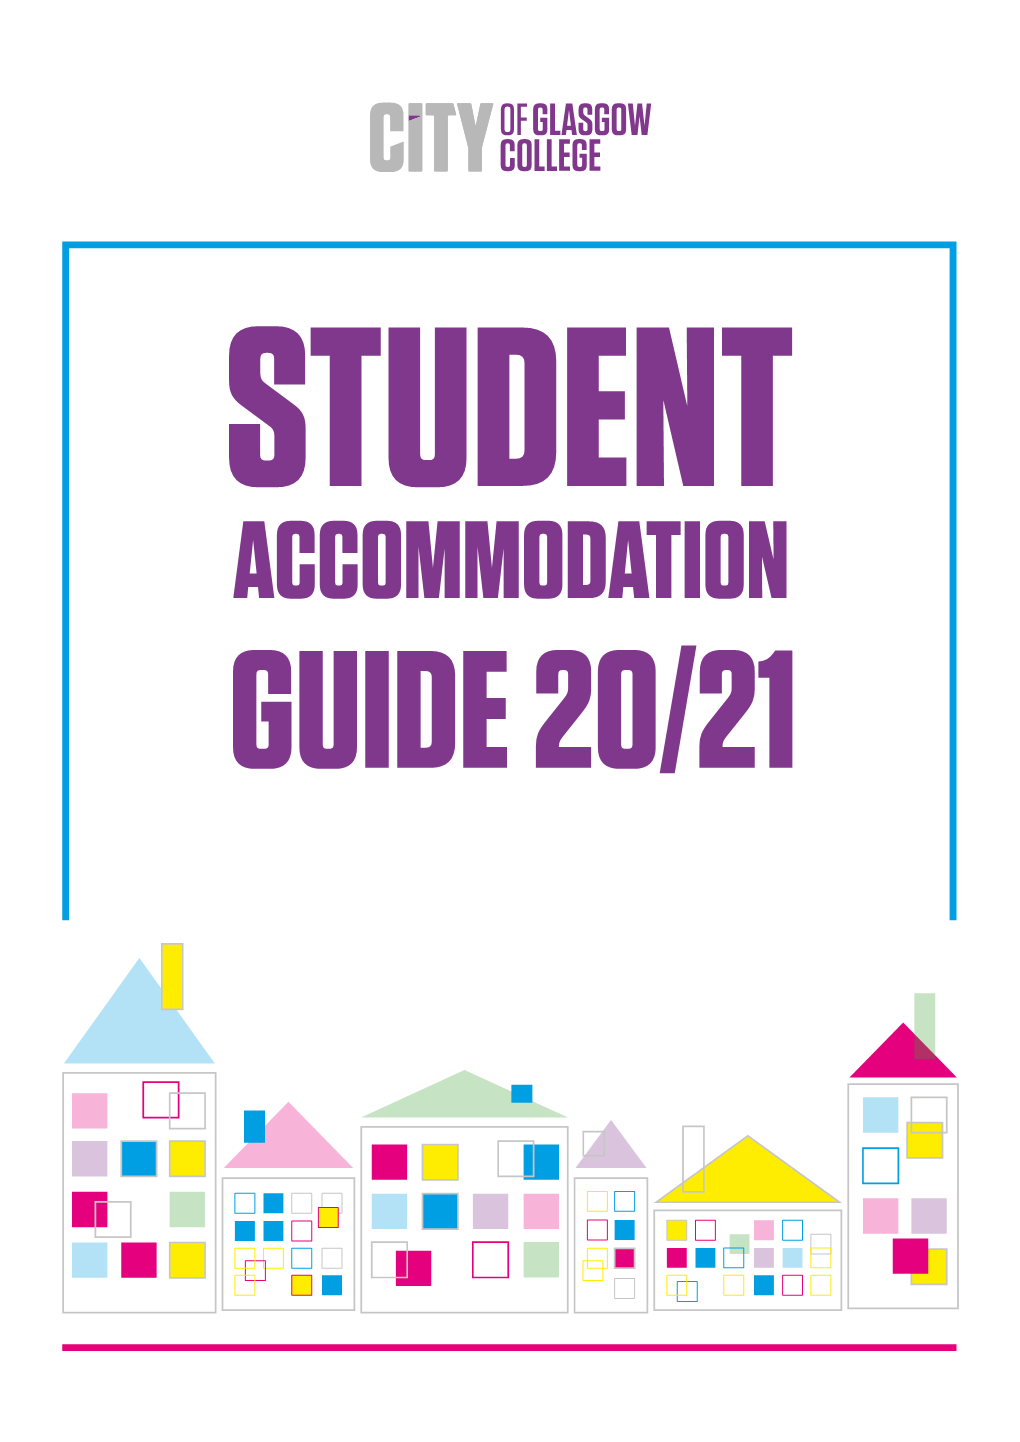 ACCOMMODATION GUIDE 20/21 Contents